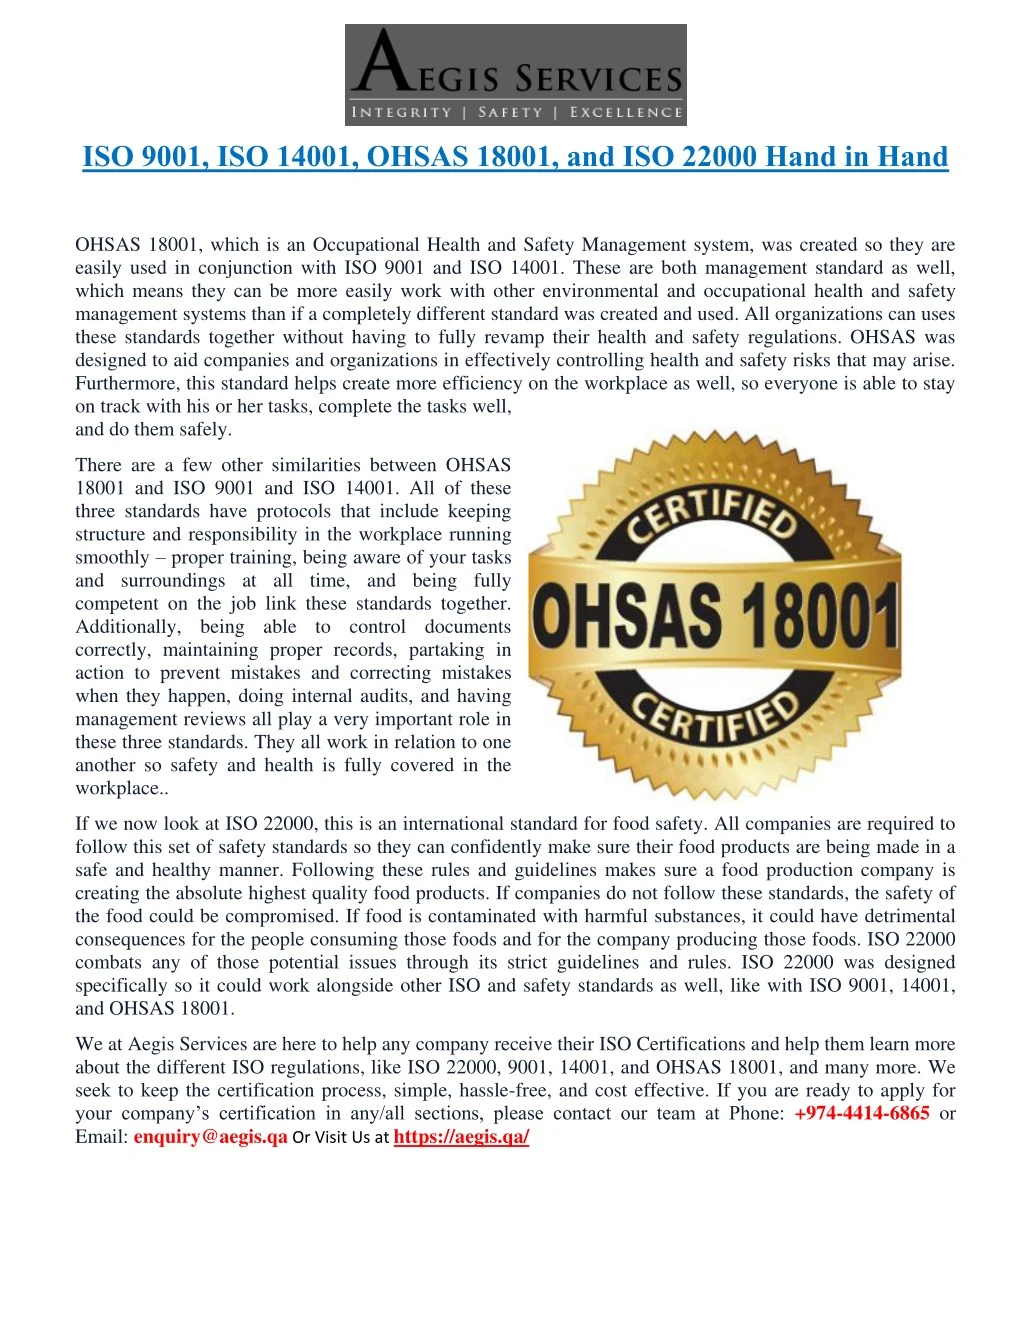 iso 9001 iso 14001 ohsas 18001 and iso 22000 hand